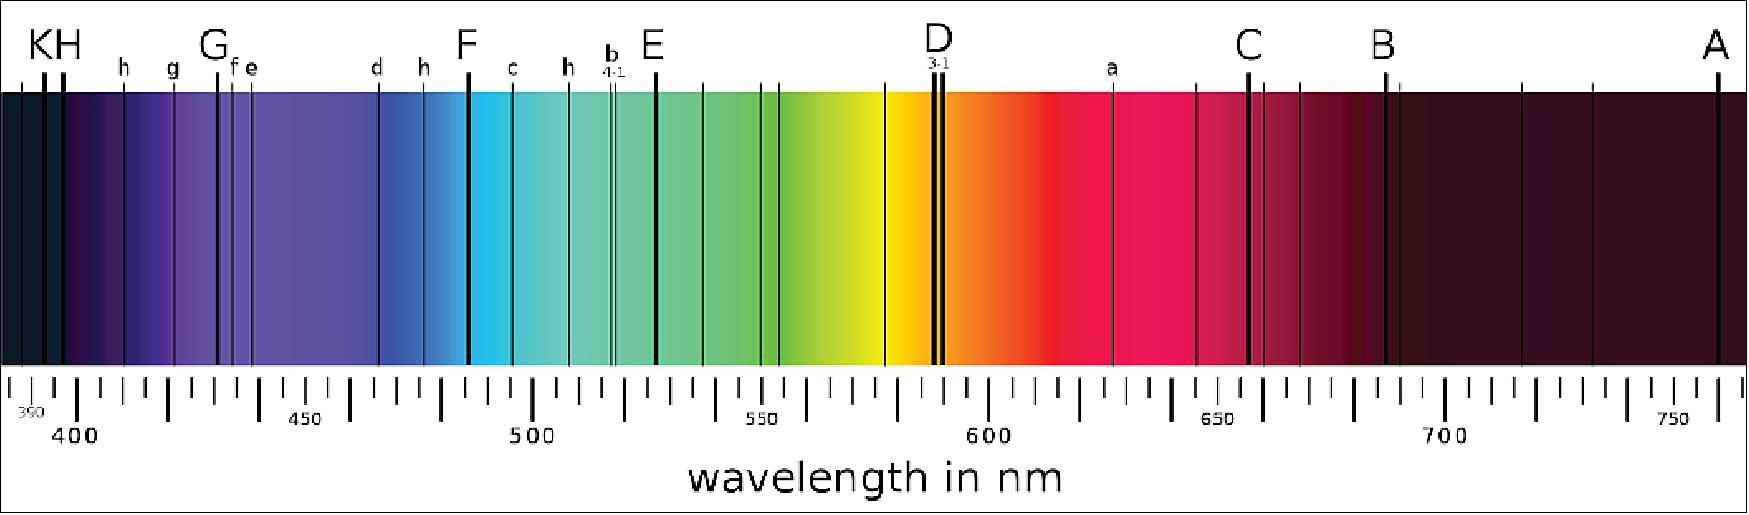 Figure 3: Fraunhofer lines (A-K) in the electromagnetic spectrum